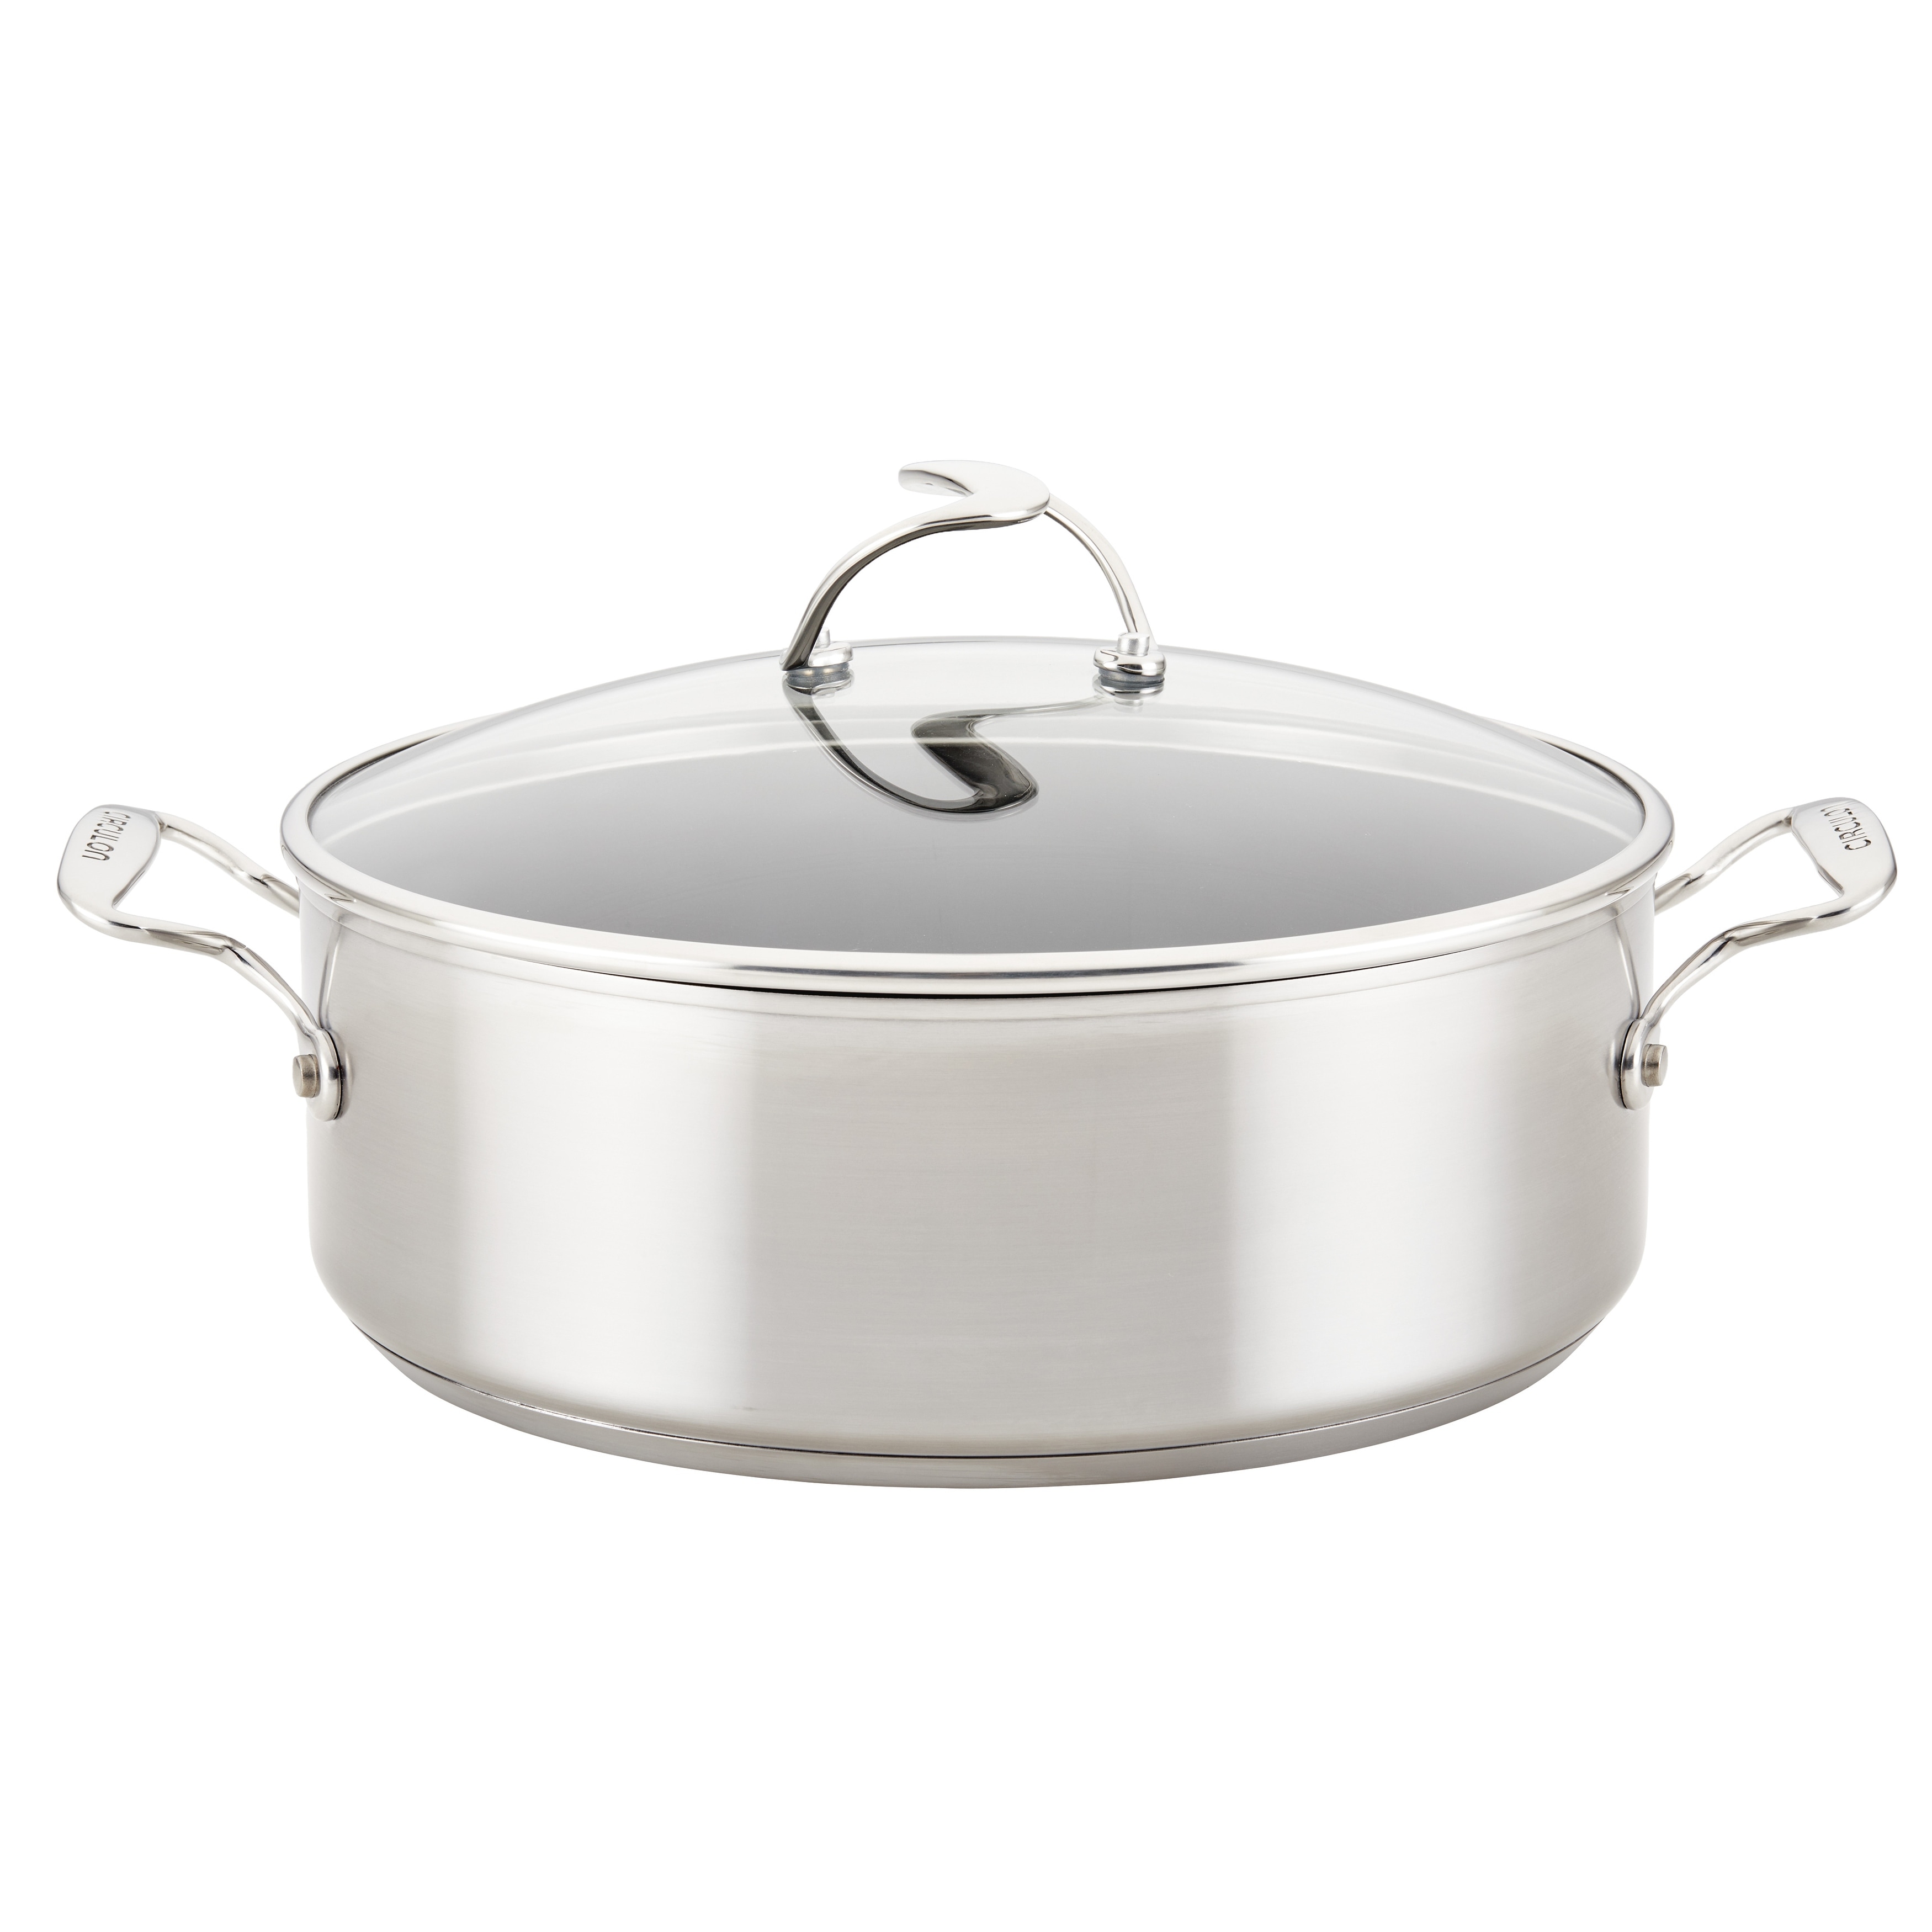 https://ak1.ostkcdn.com/images/products/is/images/direct/dc0cf45dc883ef542082c2490de69285dd2cd677/Circulon-Stainless-Steel-Induction-Stockpot-with-Lid-and-SteelShield-Hybrid-Stainless-and-Nonstick-Technology%2C-7.5-Quart%2C-Silver.jpg